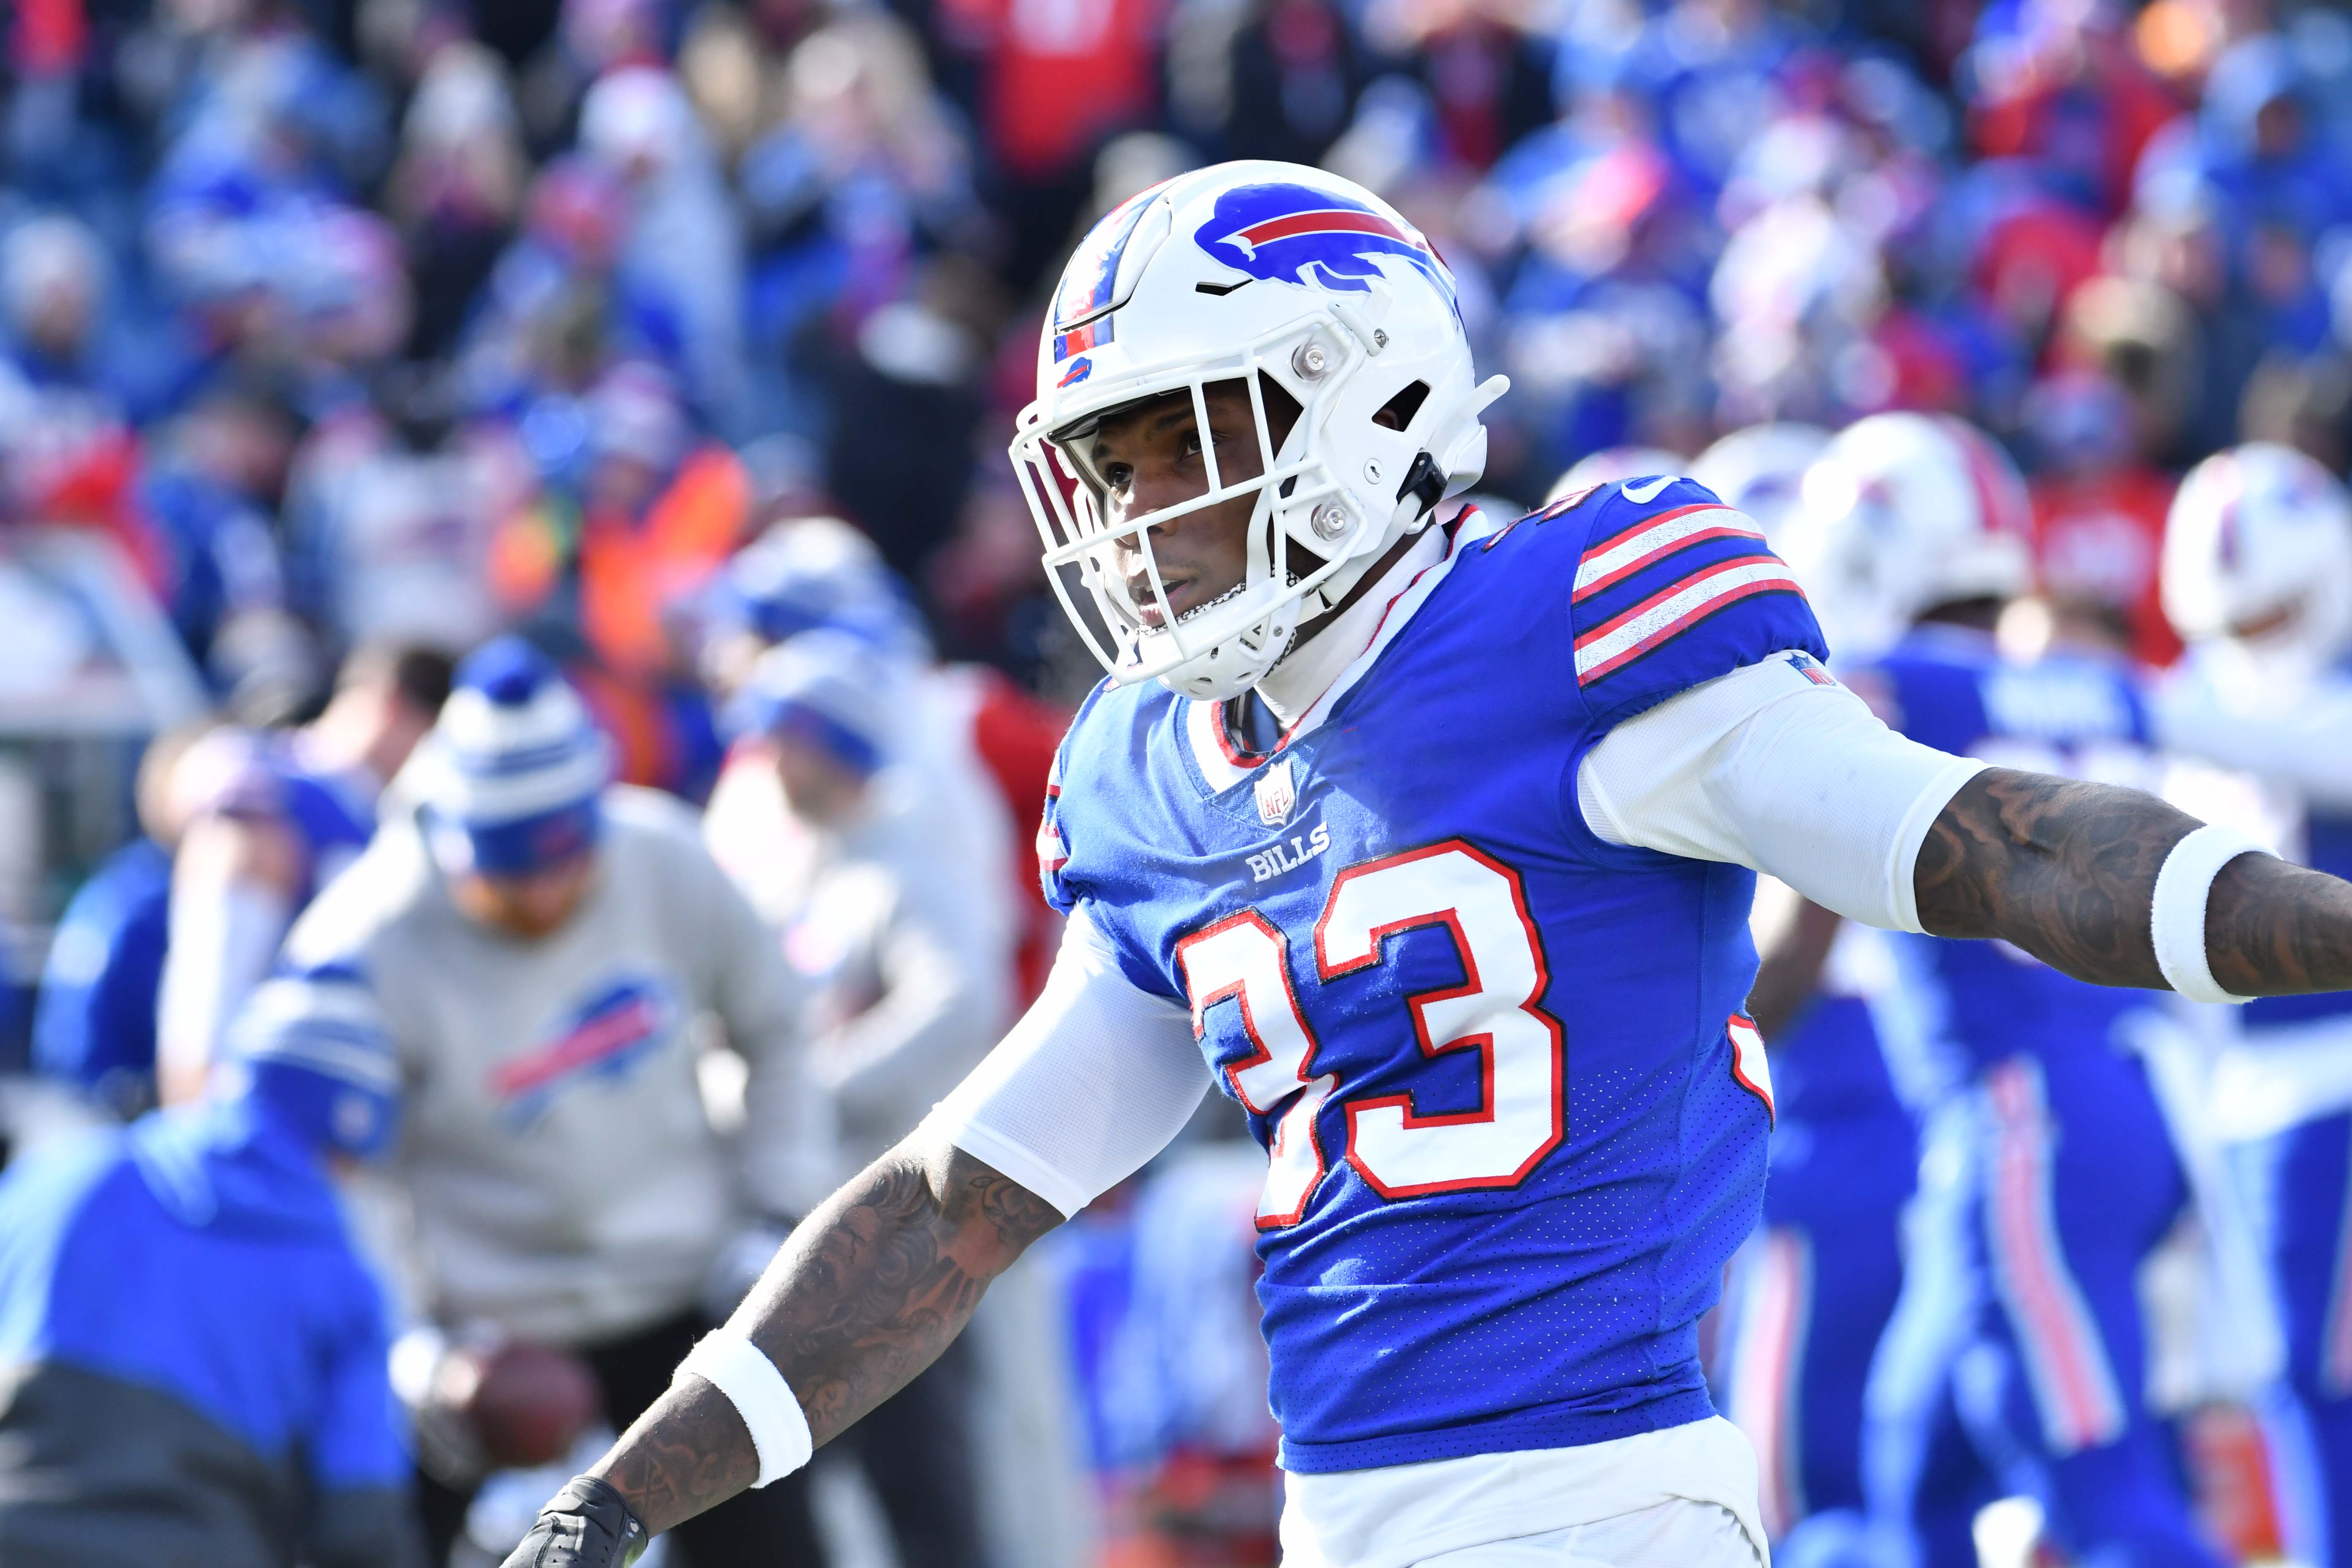 Jan 15, 2023; Orchard Park, NY, USA; Buffalo Bills cornerback Siran Neal warms up before playing against the Miami Dolphins in an NFL wild card game at Highmark Stadium.